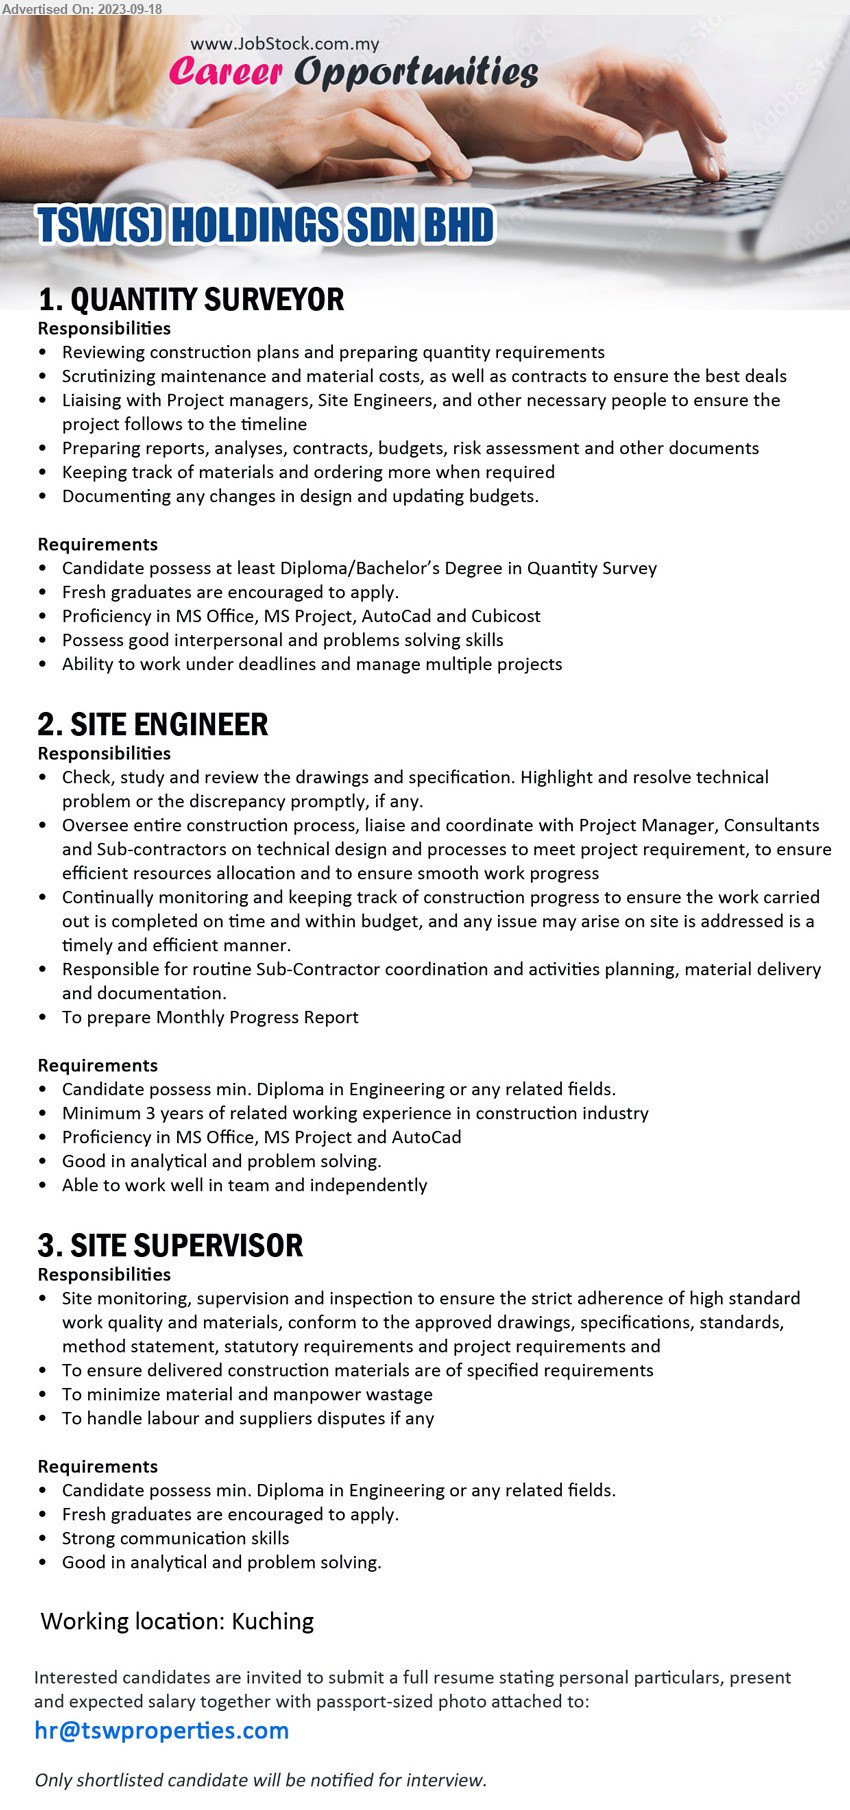 TSW(S) HOLDINGS SDN BHD - 1. QUANTITY SURVEYOR (Kuching), Diploma/Bachelor’s Degree in Quantity Survey,...
2. SITE ENGINEER (Kuching), Diploma in Engineering, 3 yrs. exp., Proficiency in MS Office, MS Project and AutoCad ,...
3. SITE SUPERVISOR (Kuching),  Diploma in Engineering, Fresh graduates are encouraged to apply.,...
Email resume to ...
